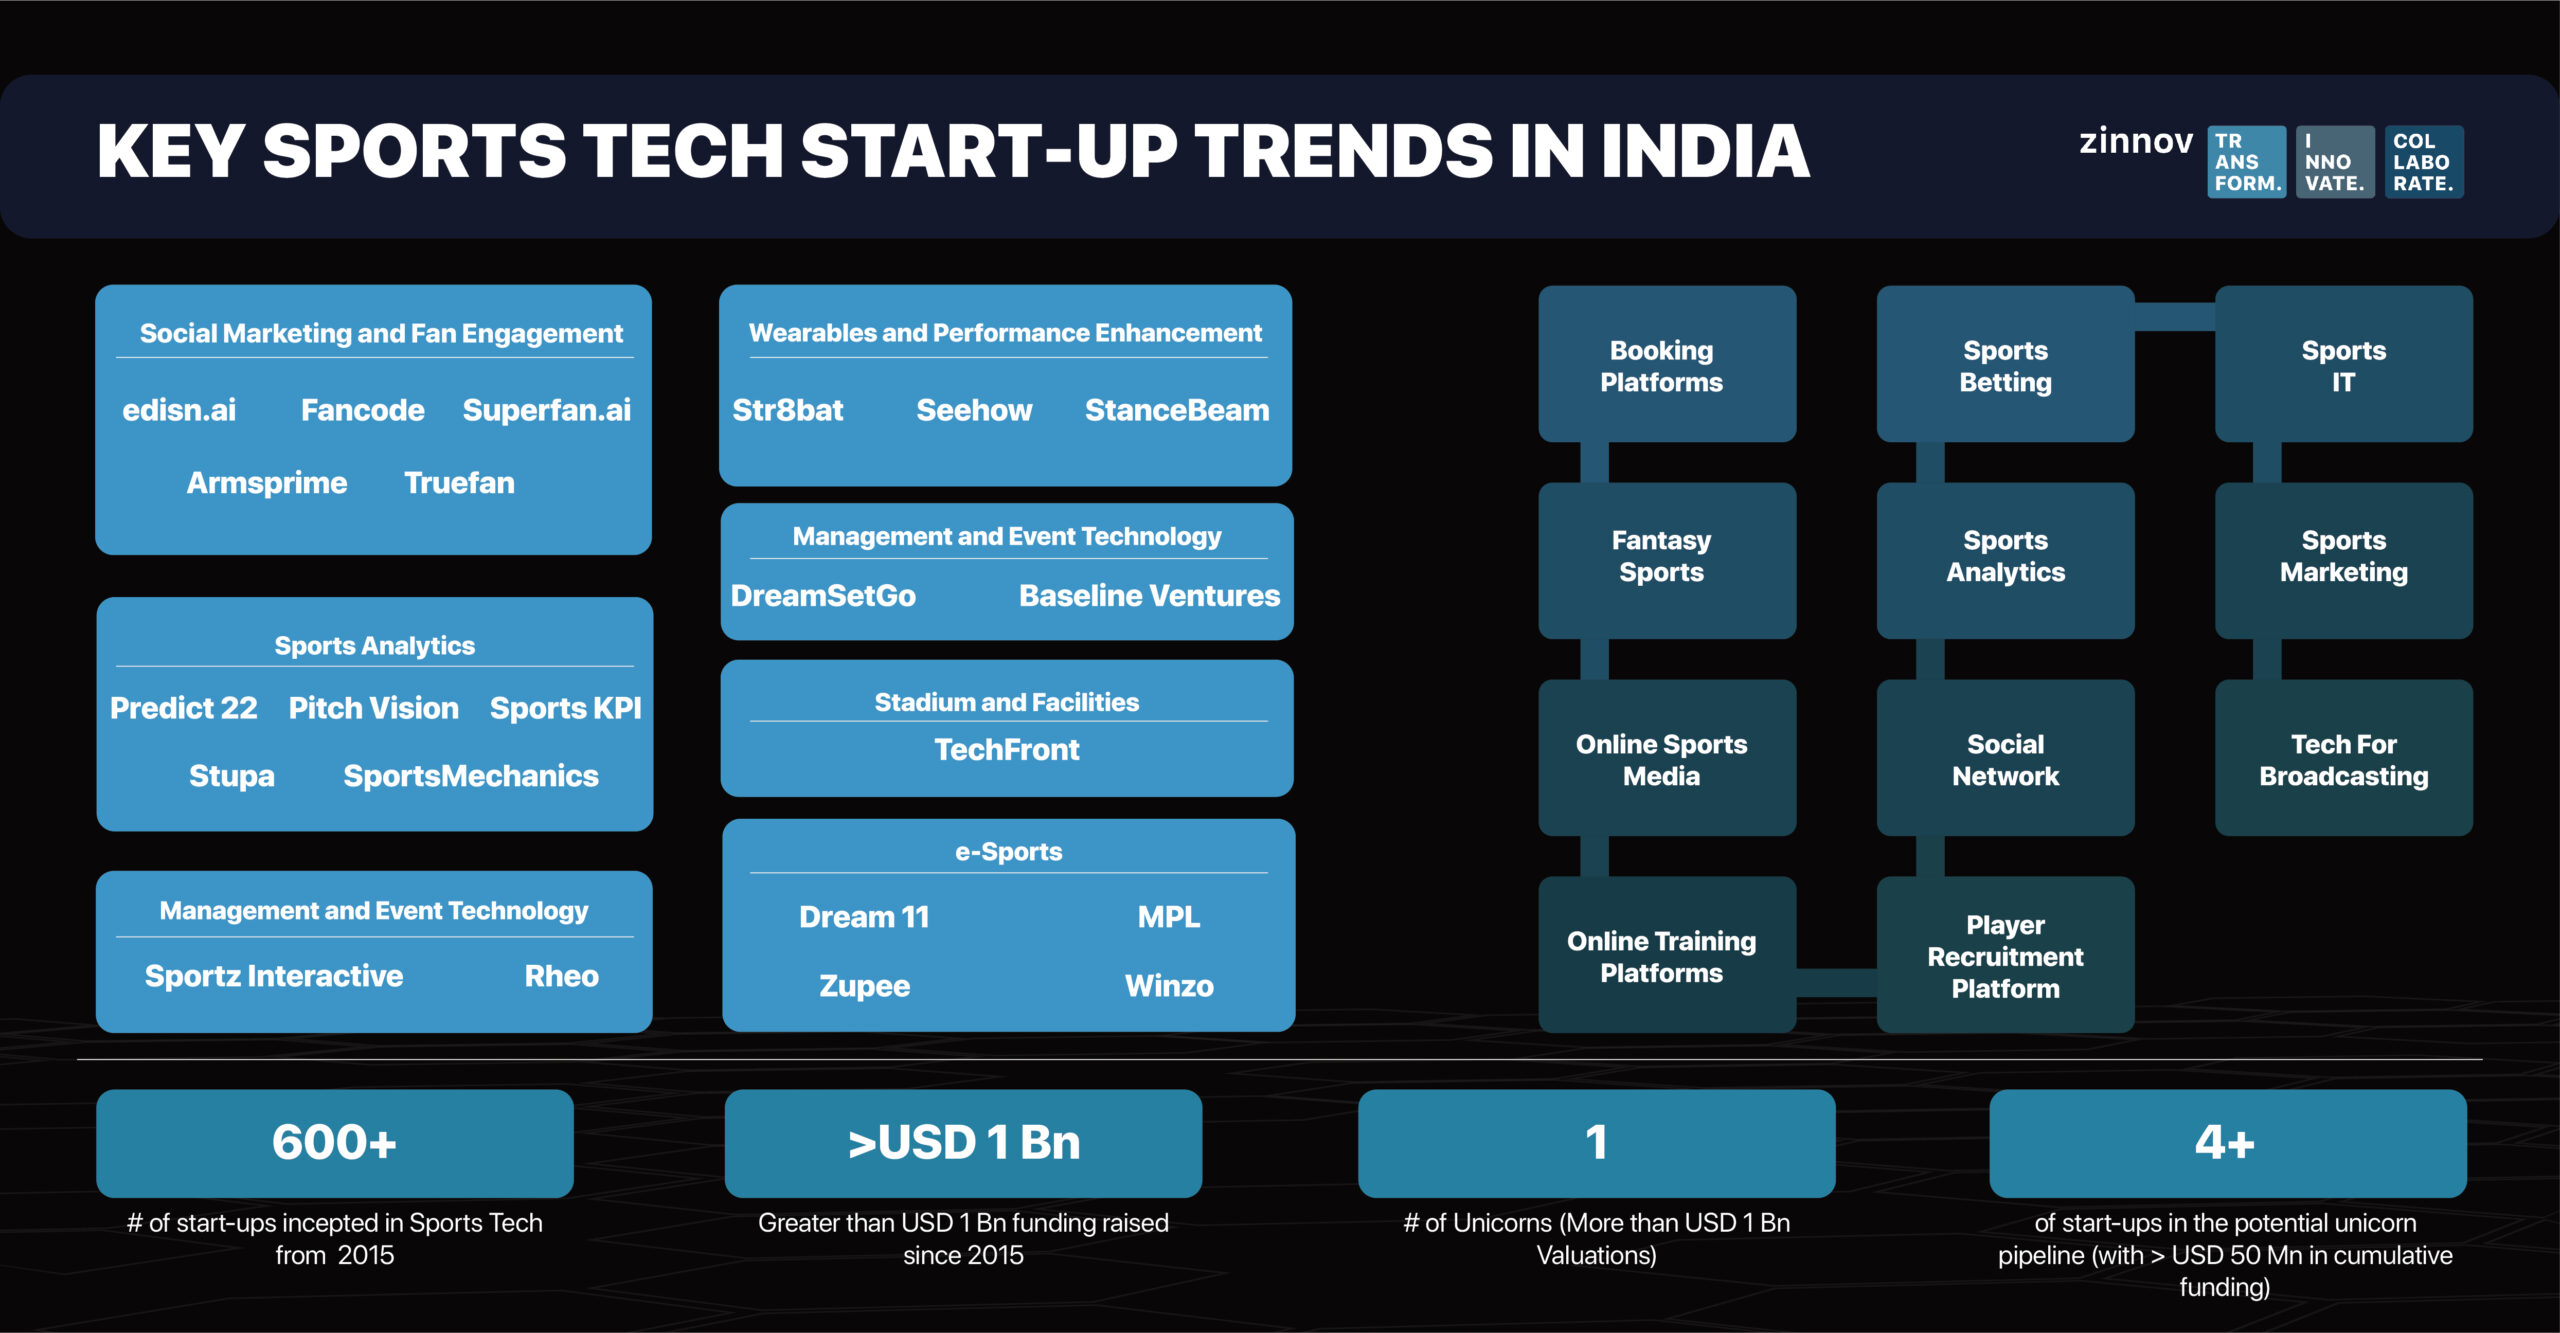 Key sports tech start-up trends in India